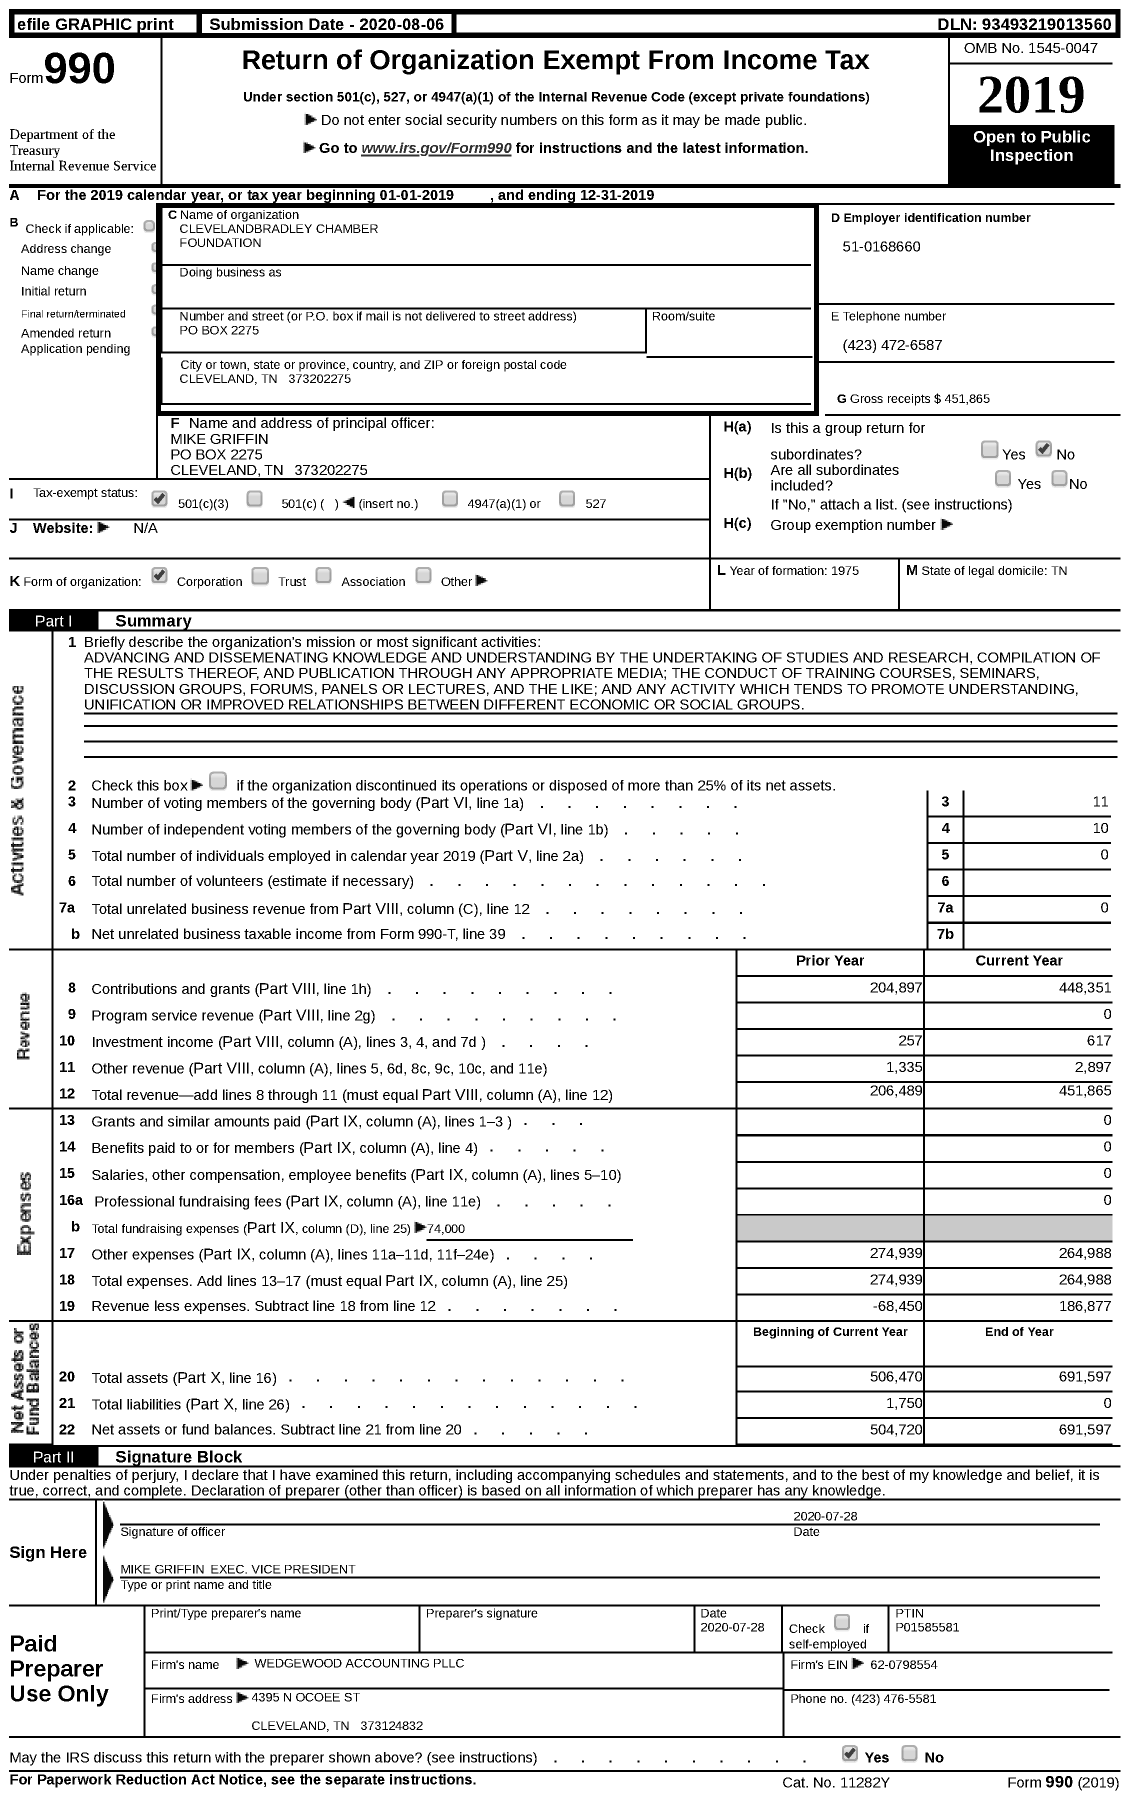 Image of first page of 2019 Form 990 for Clevelandbradley Chamber Foundation